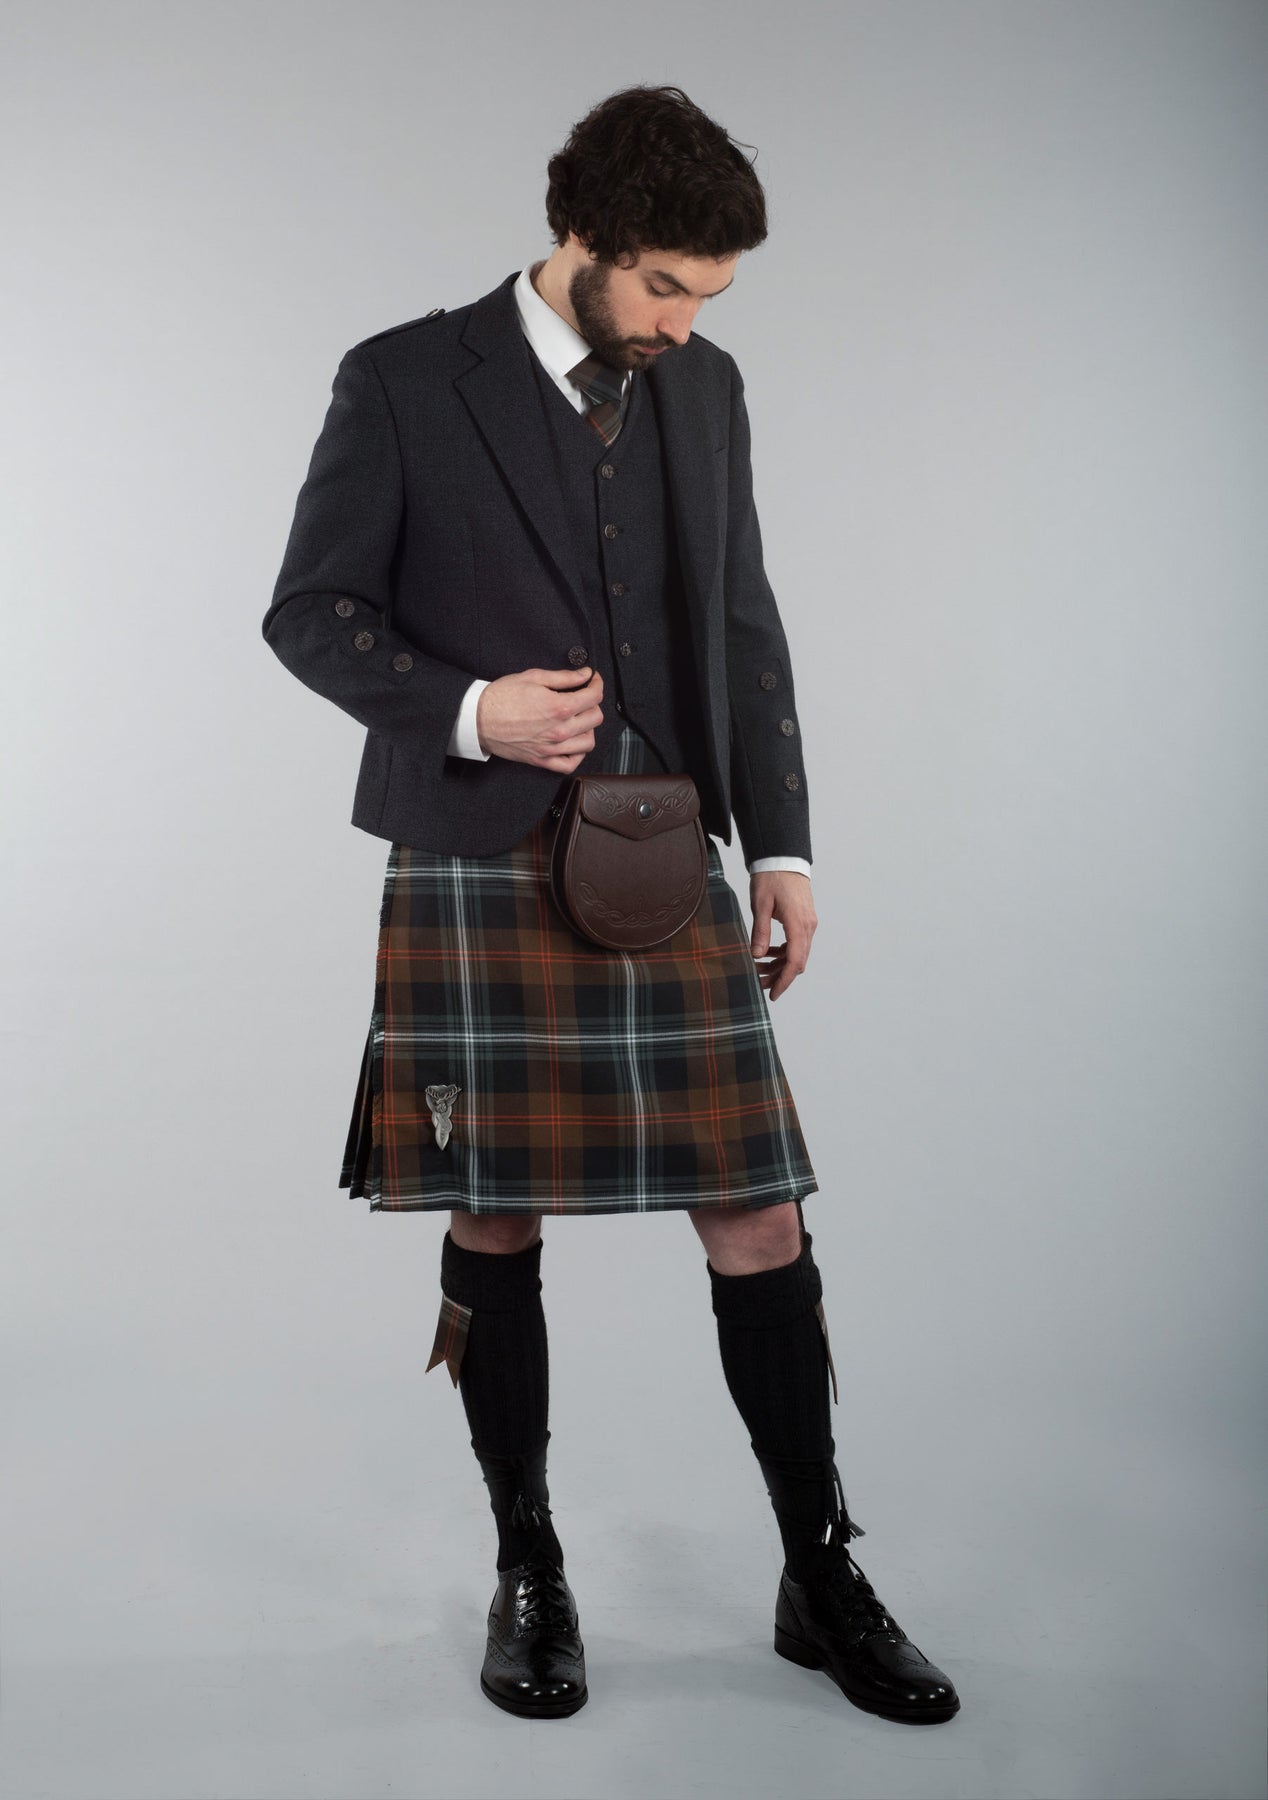 Persevere Weathered Brown Braemar Kilt Outfit Kilt Society™